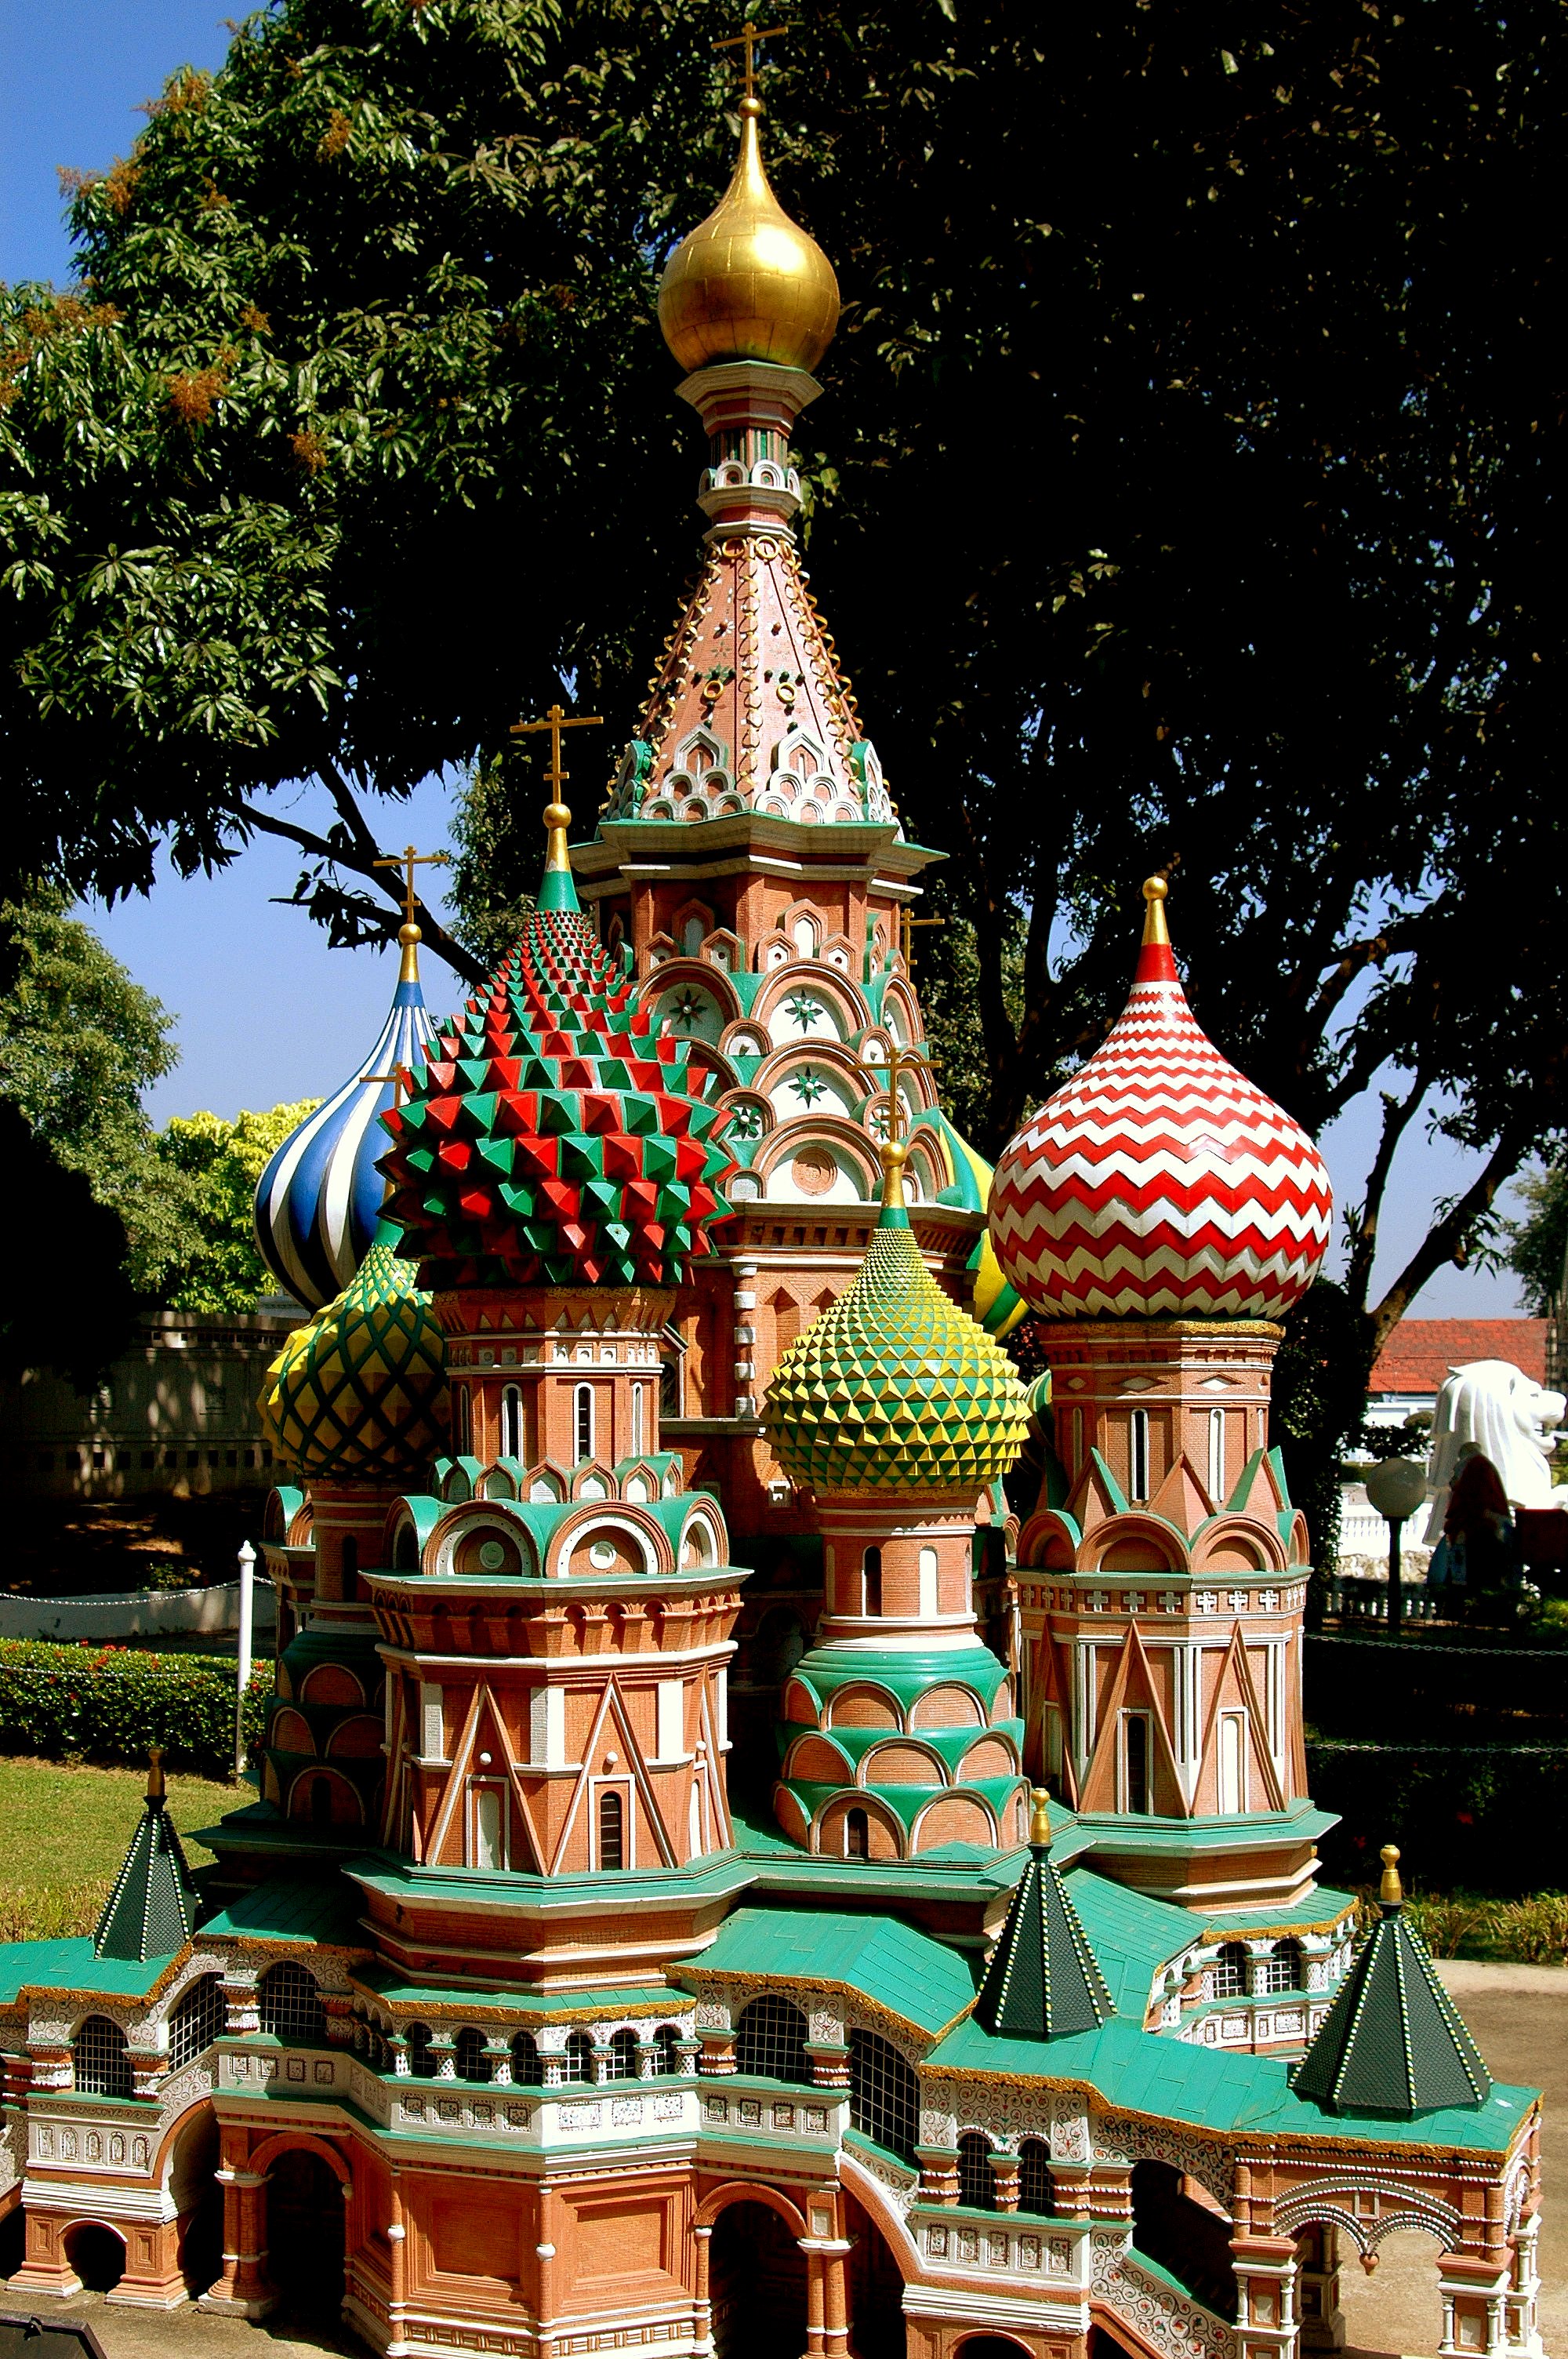 Pattaya, Thailand - December 30, 2005: Replica of St. Basil's Cathedral in Moscow's Red Square in miniature at Mini Siam outdoor theme park